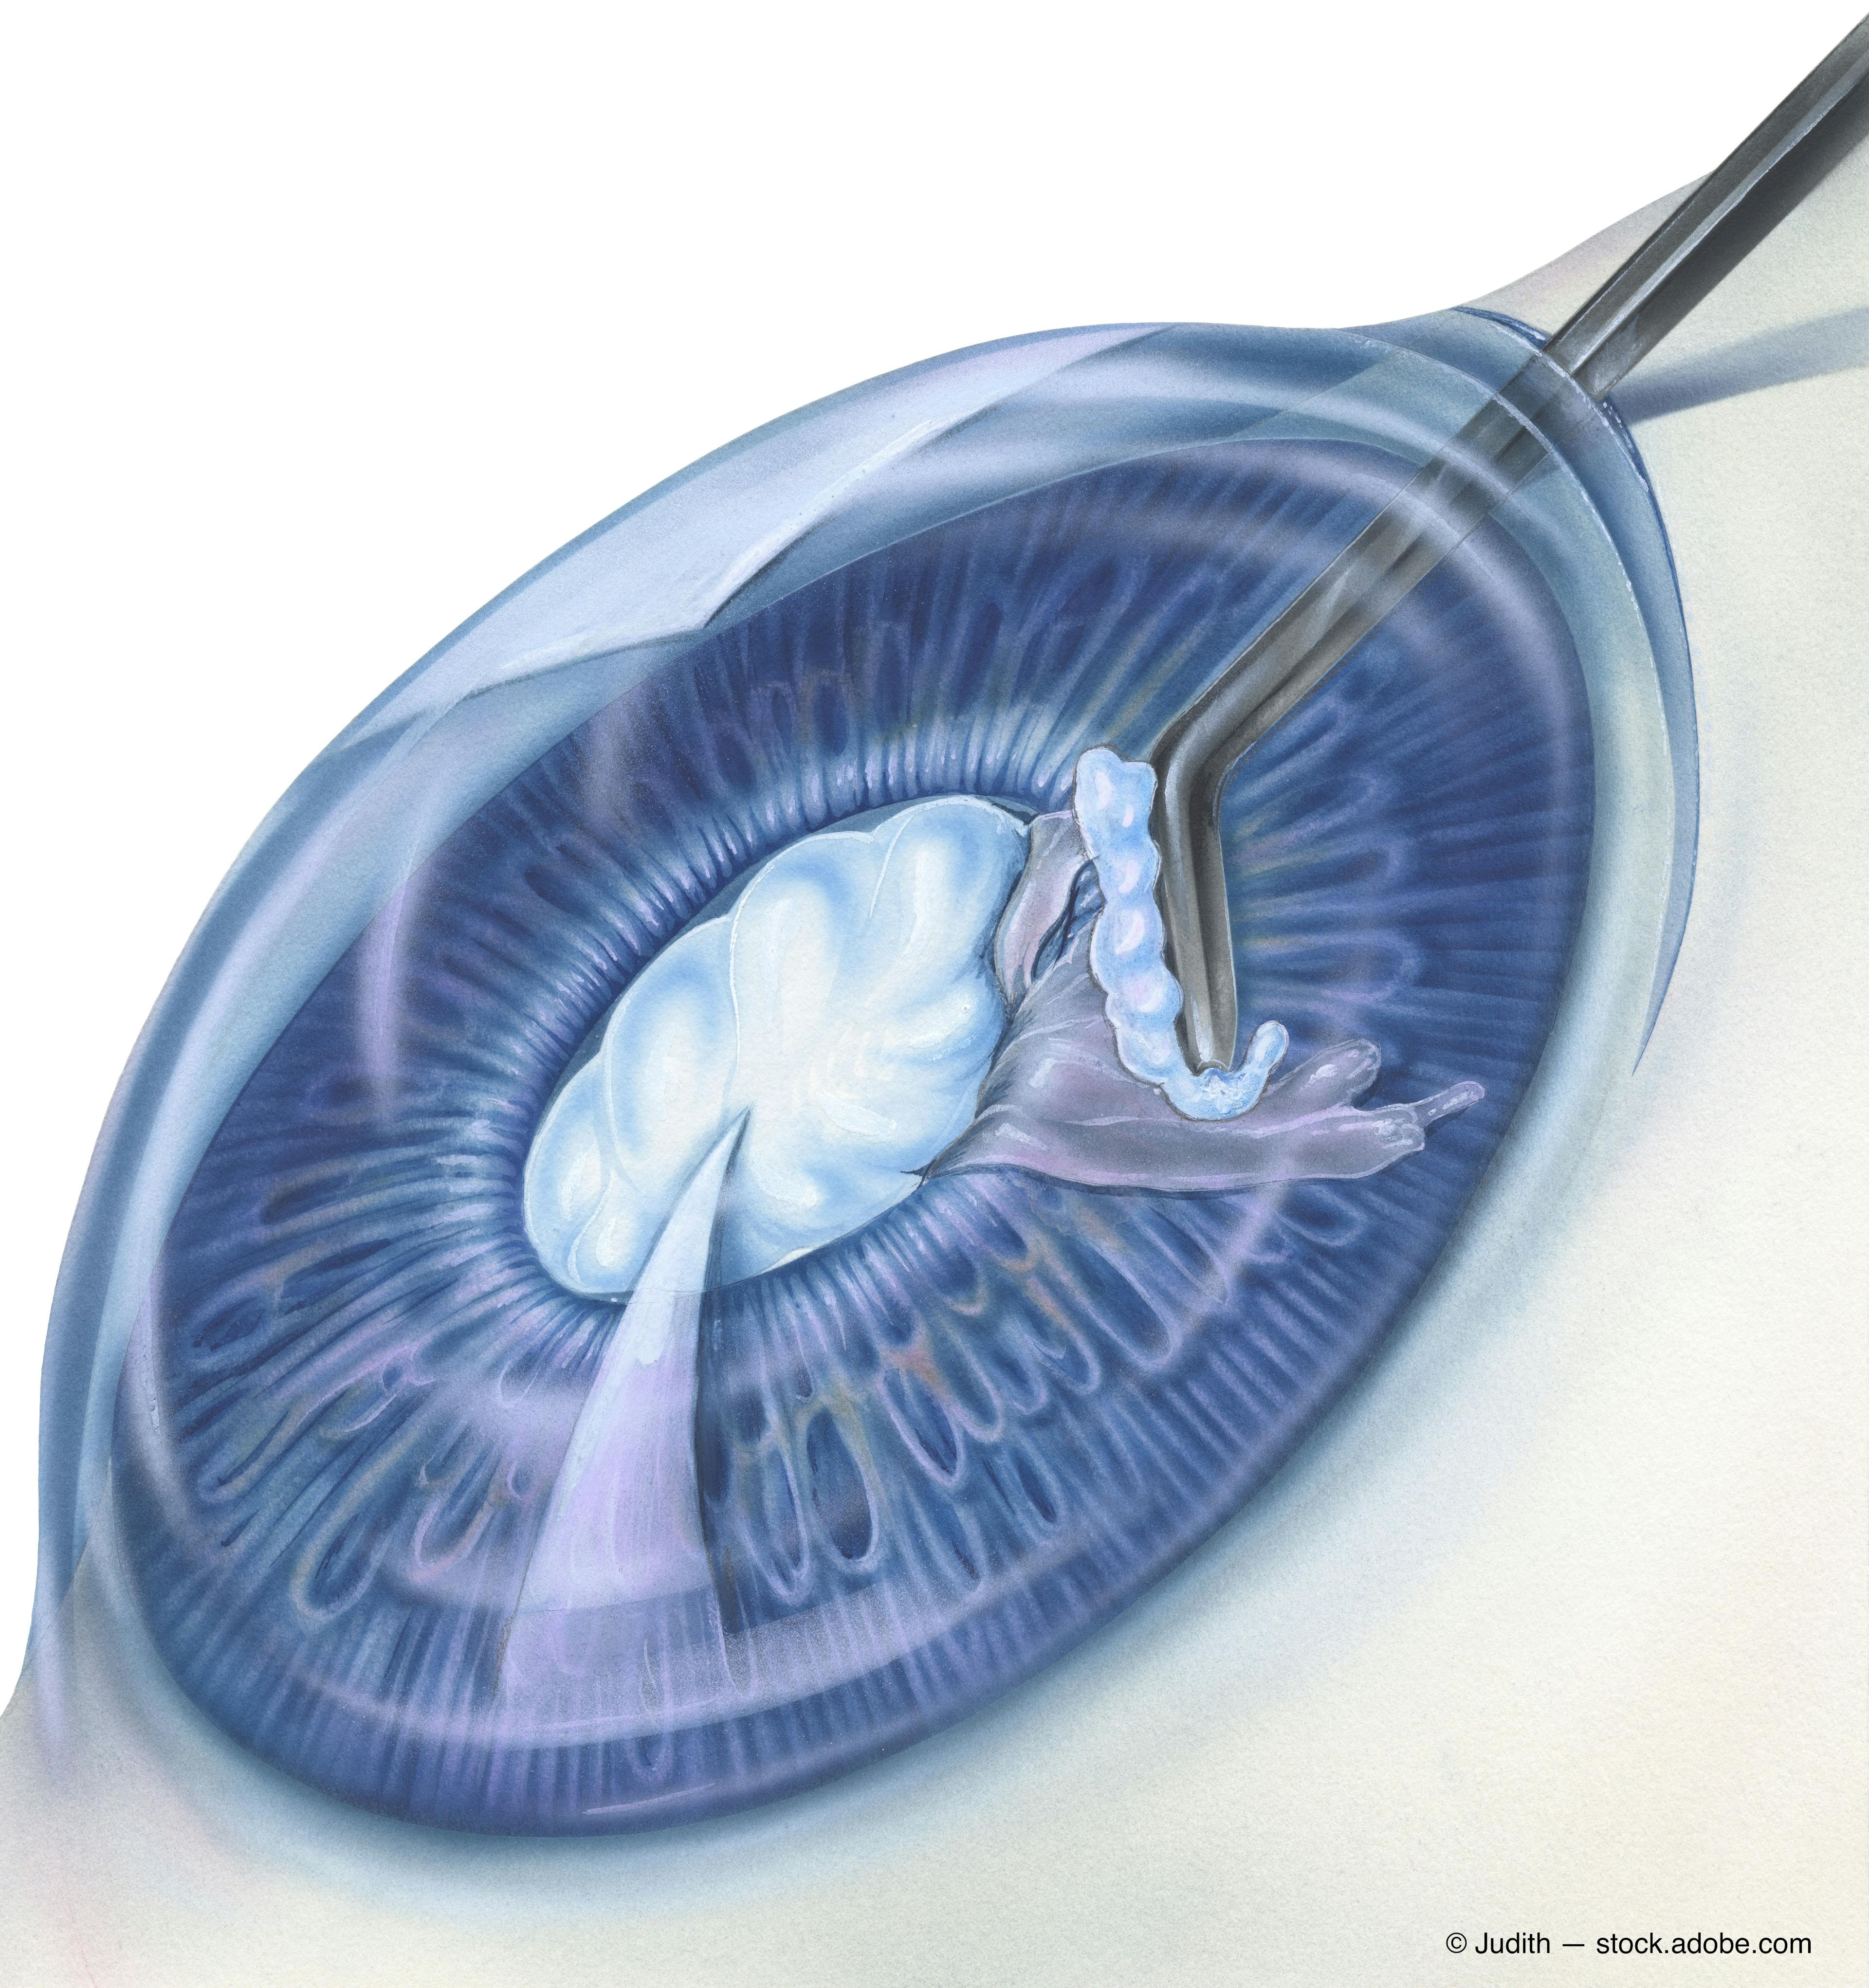 The history of progress and innovation in cataract surgery